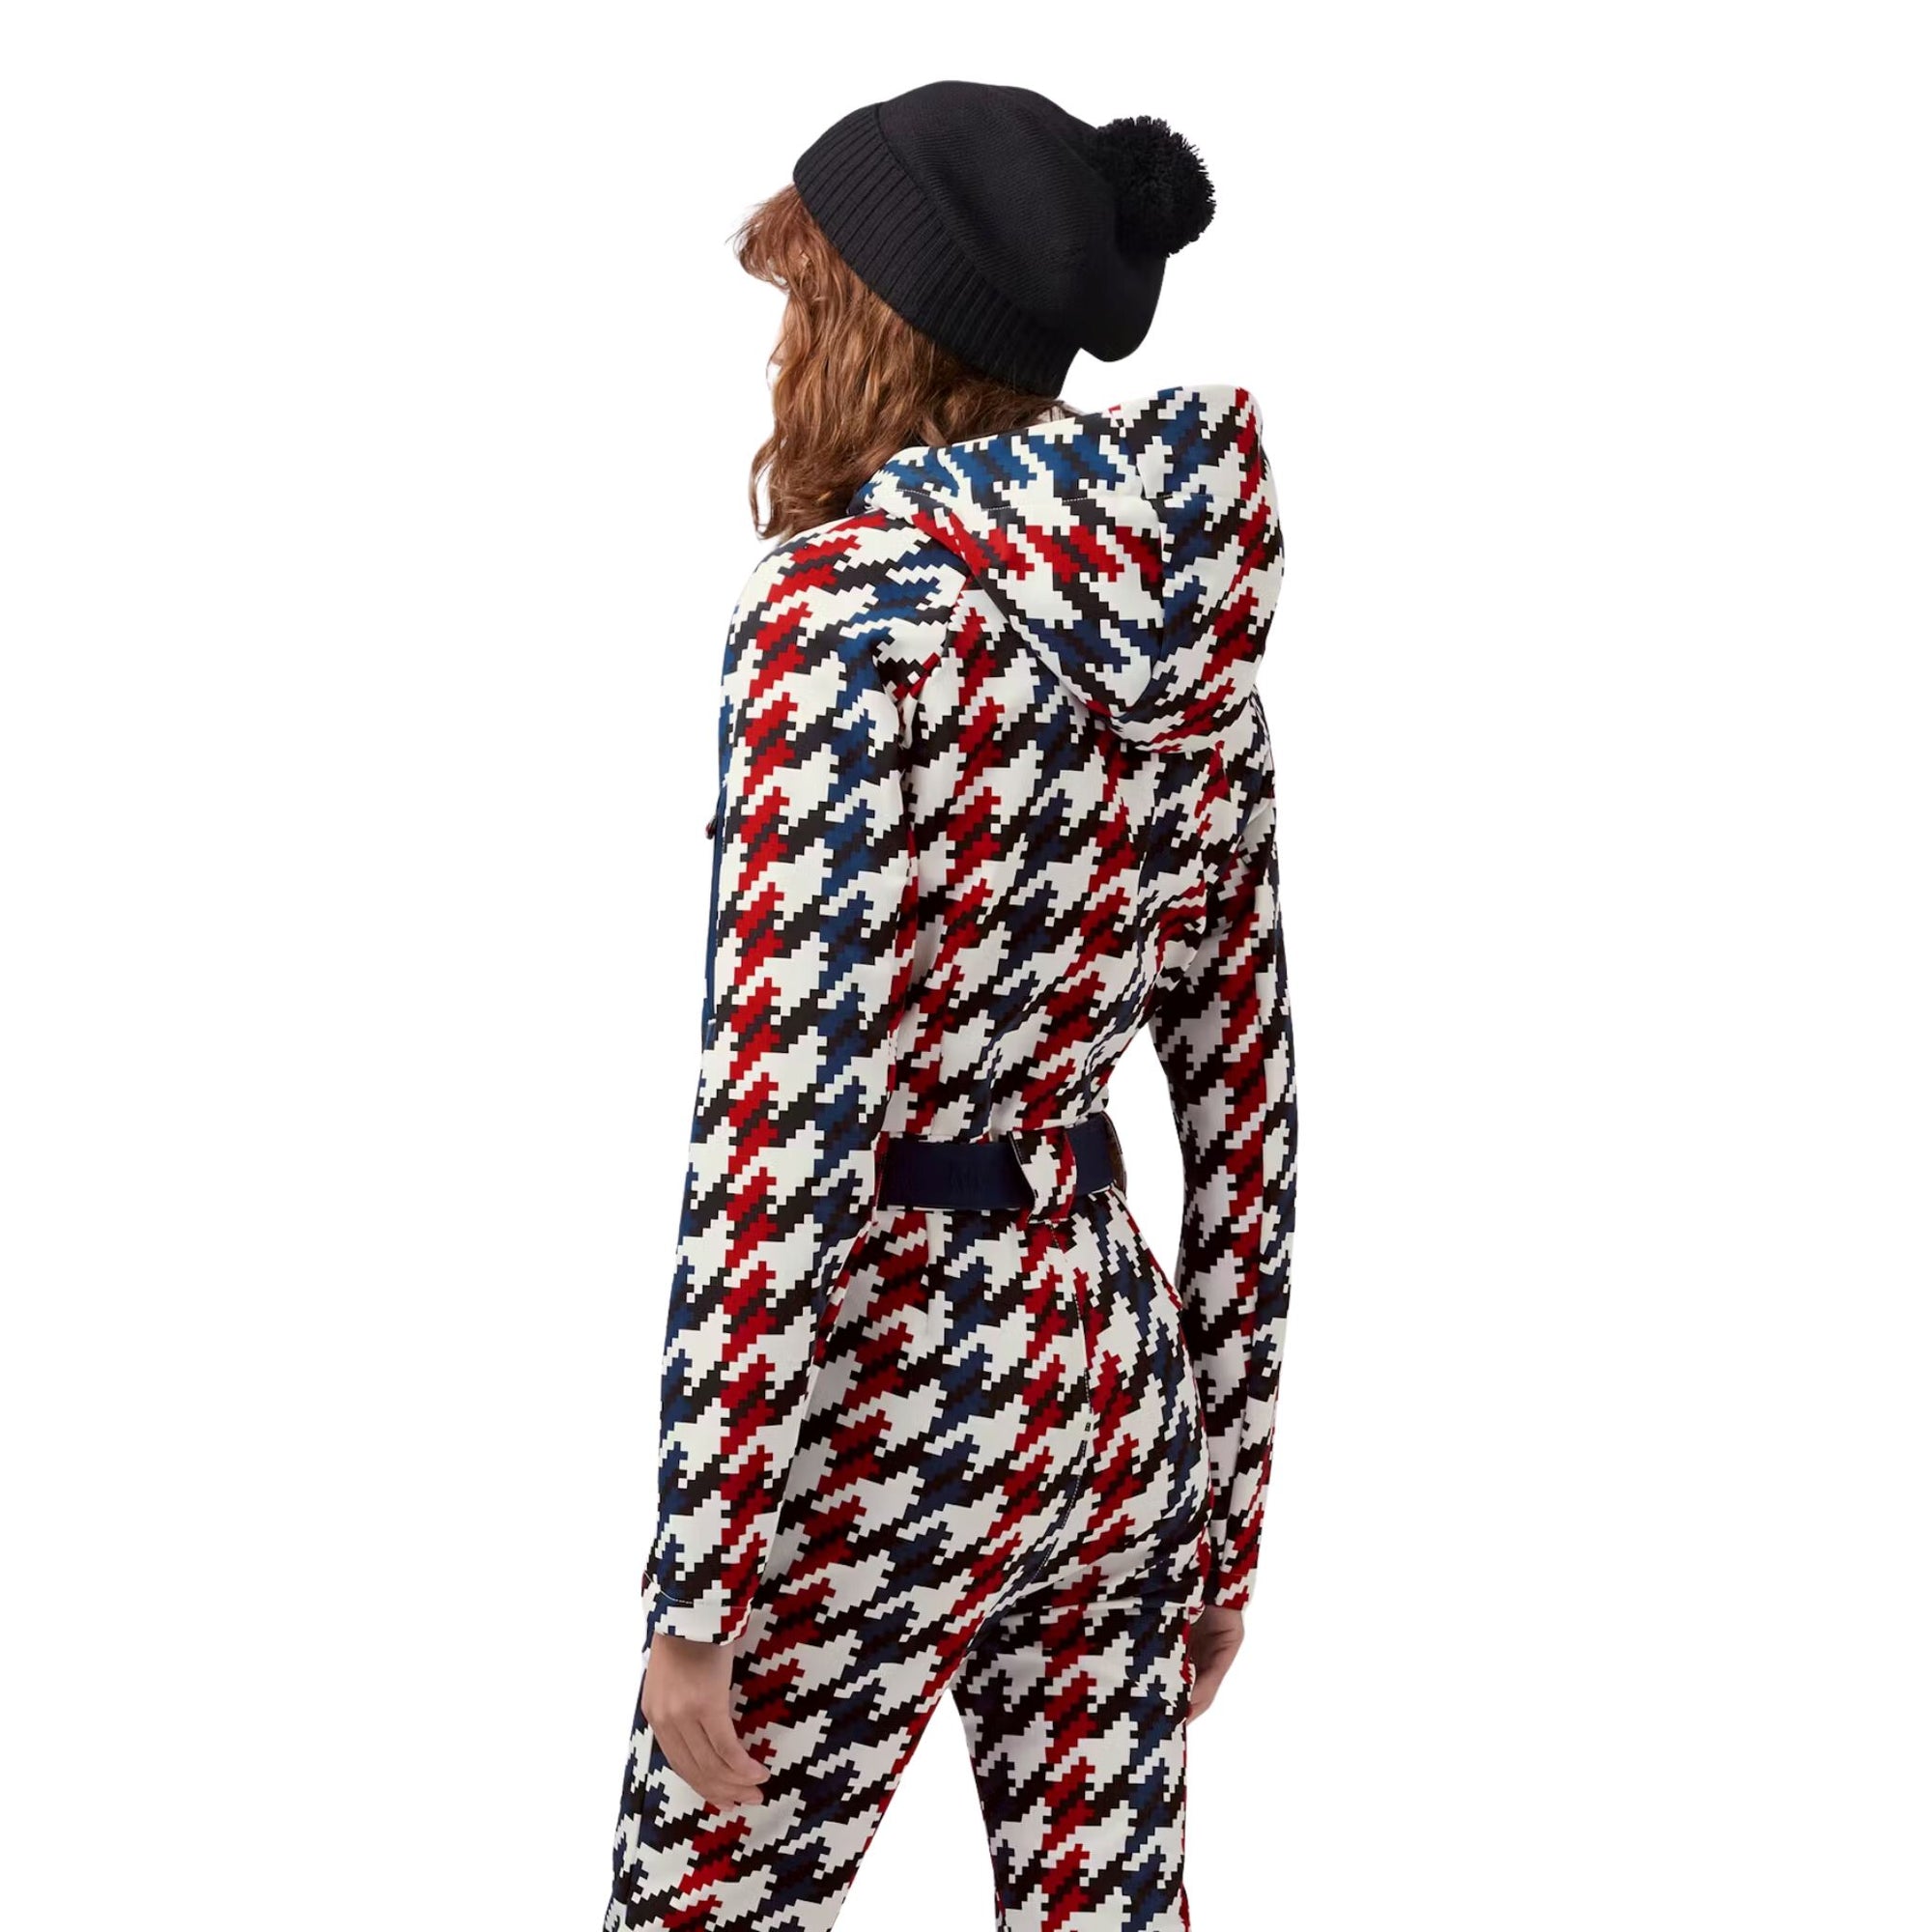 Womens Perfect Moment Houndstooth Ski Suit -Red/Navy One Piece Suits Perfect Moment XS INTL / 6-8 AU 